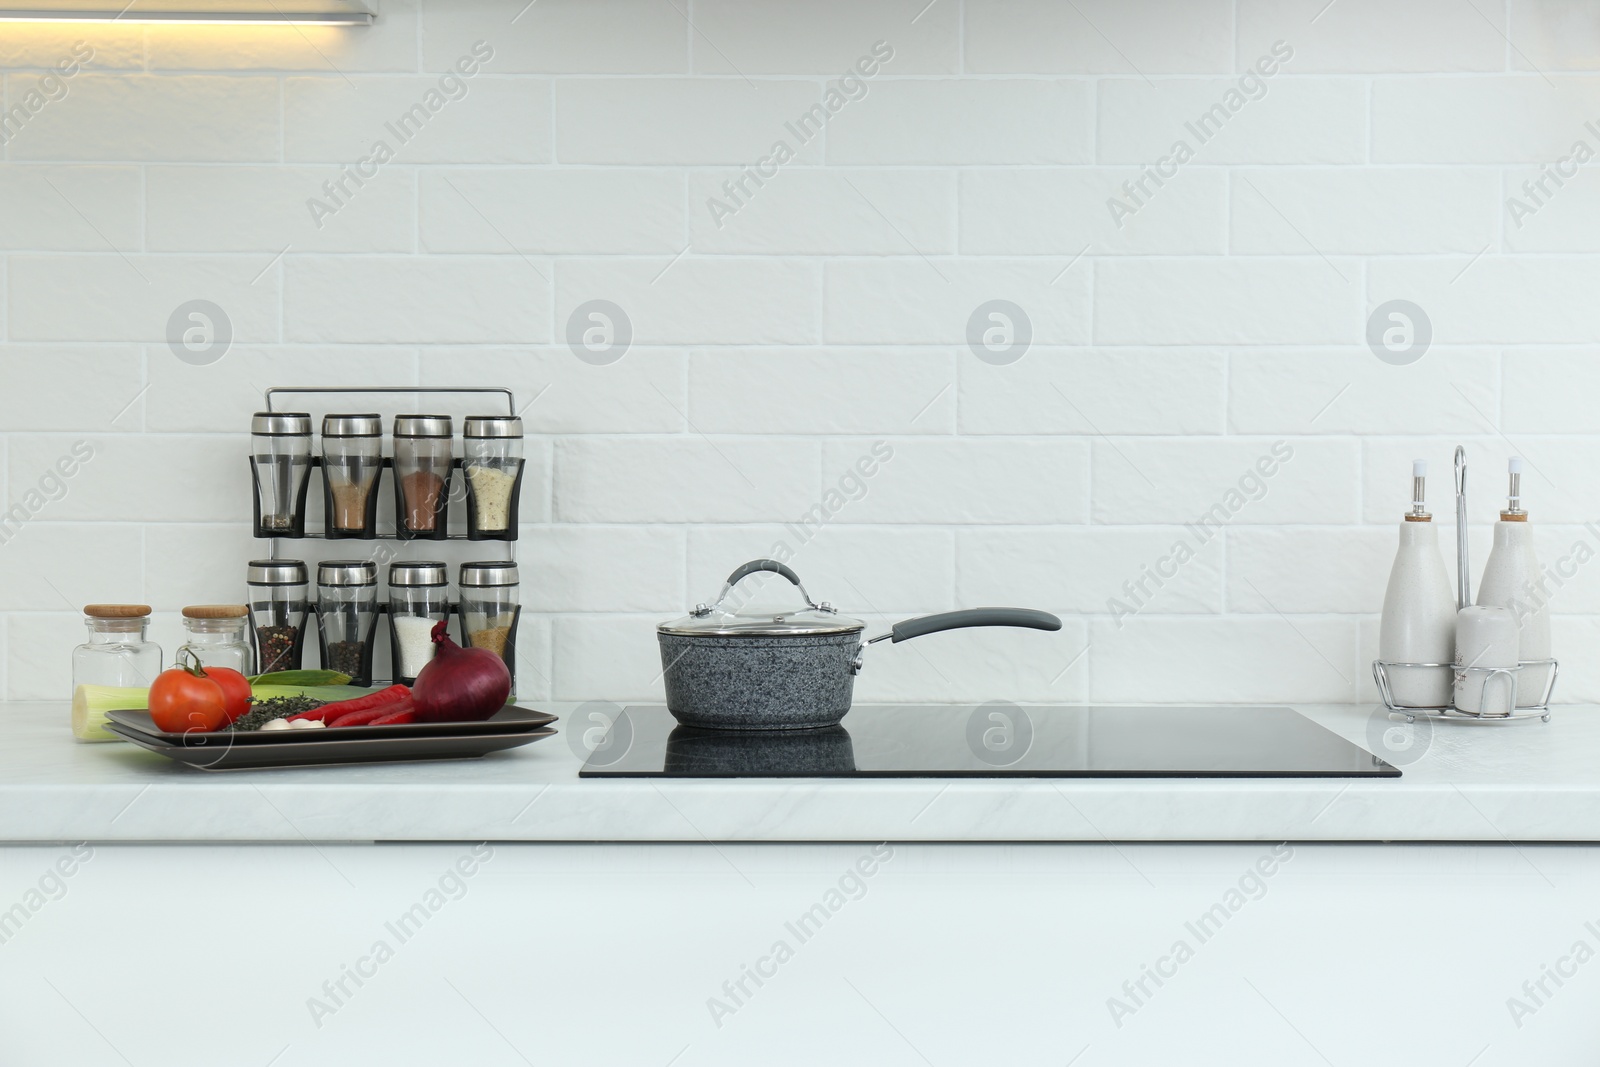 Photo of Saucepan, fresh vegetables and spices in kitchen